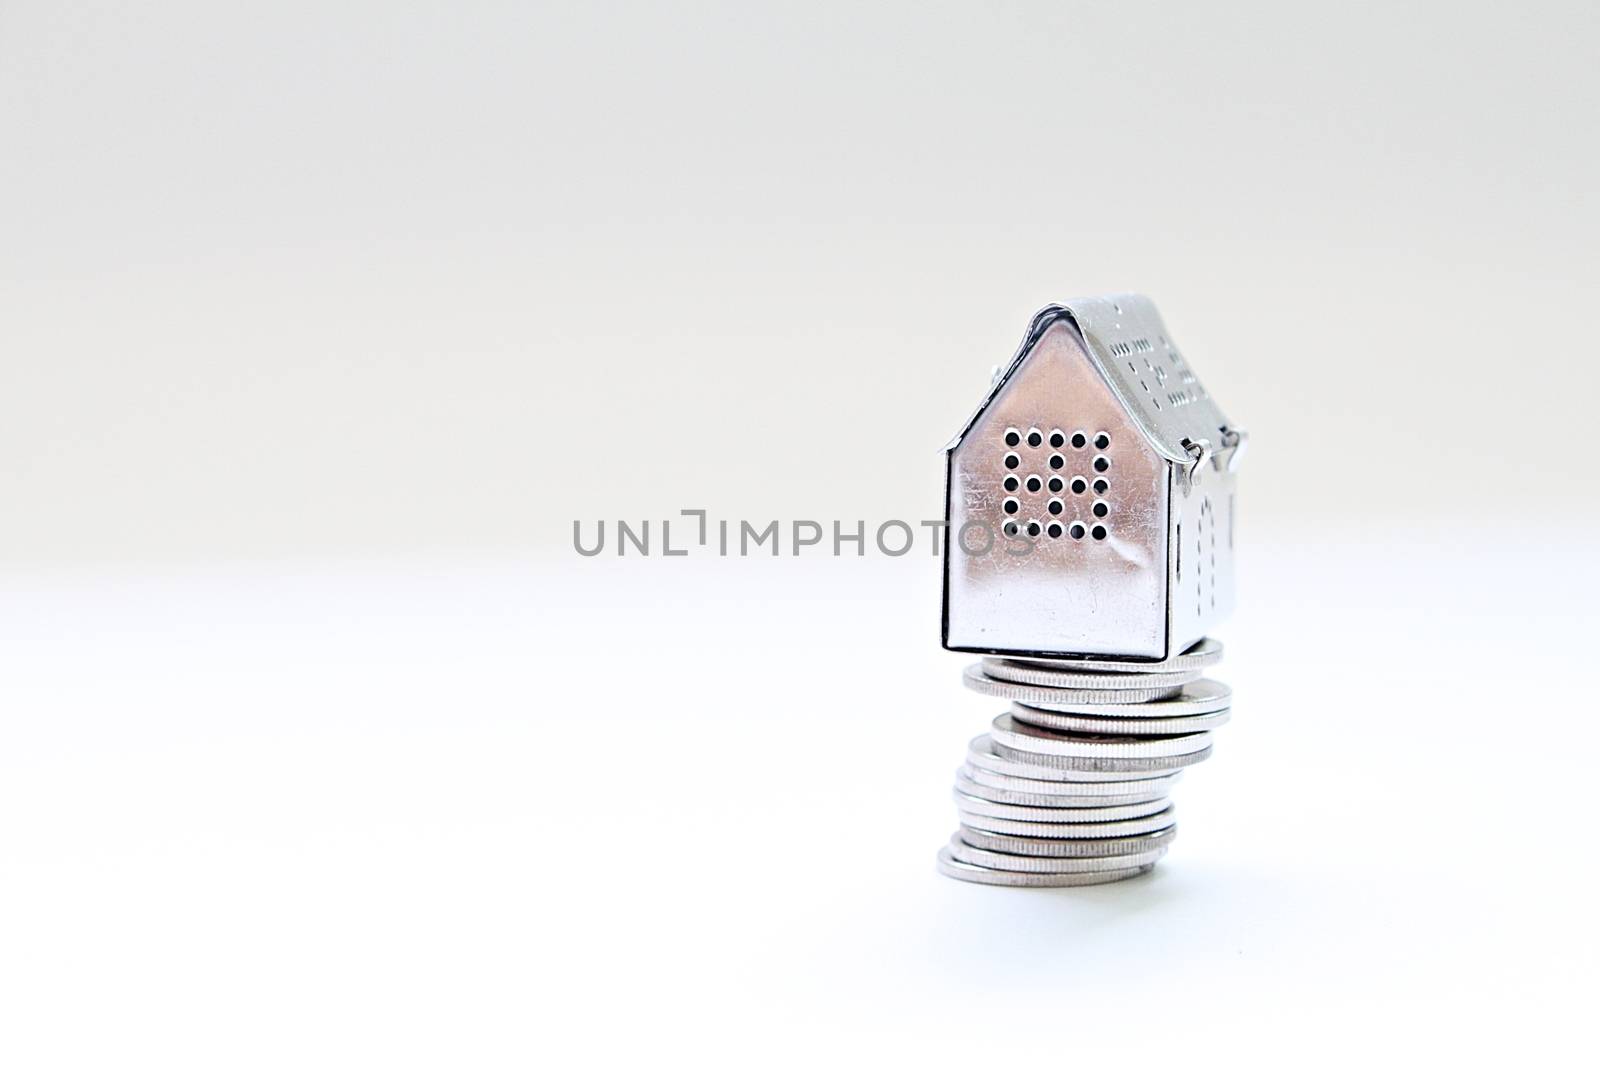 Business, finance, saving money, property ladder or mortgage loan concept : House model standing on coins stack